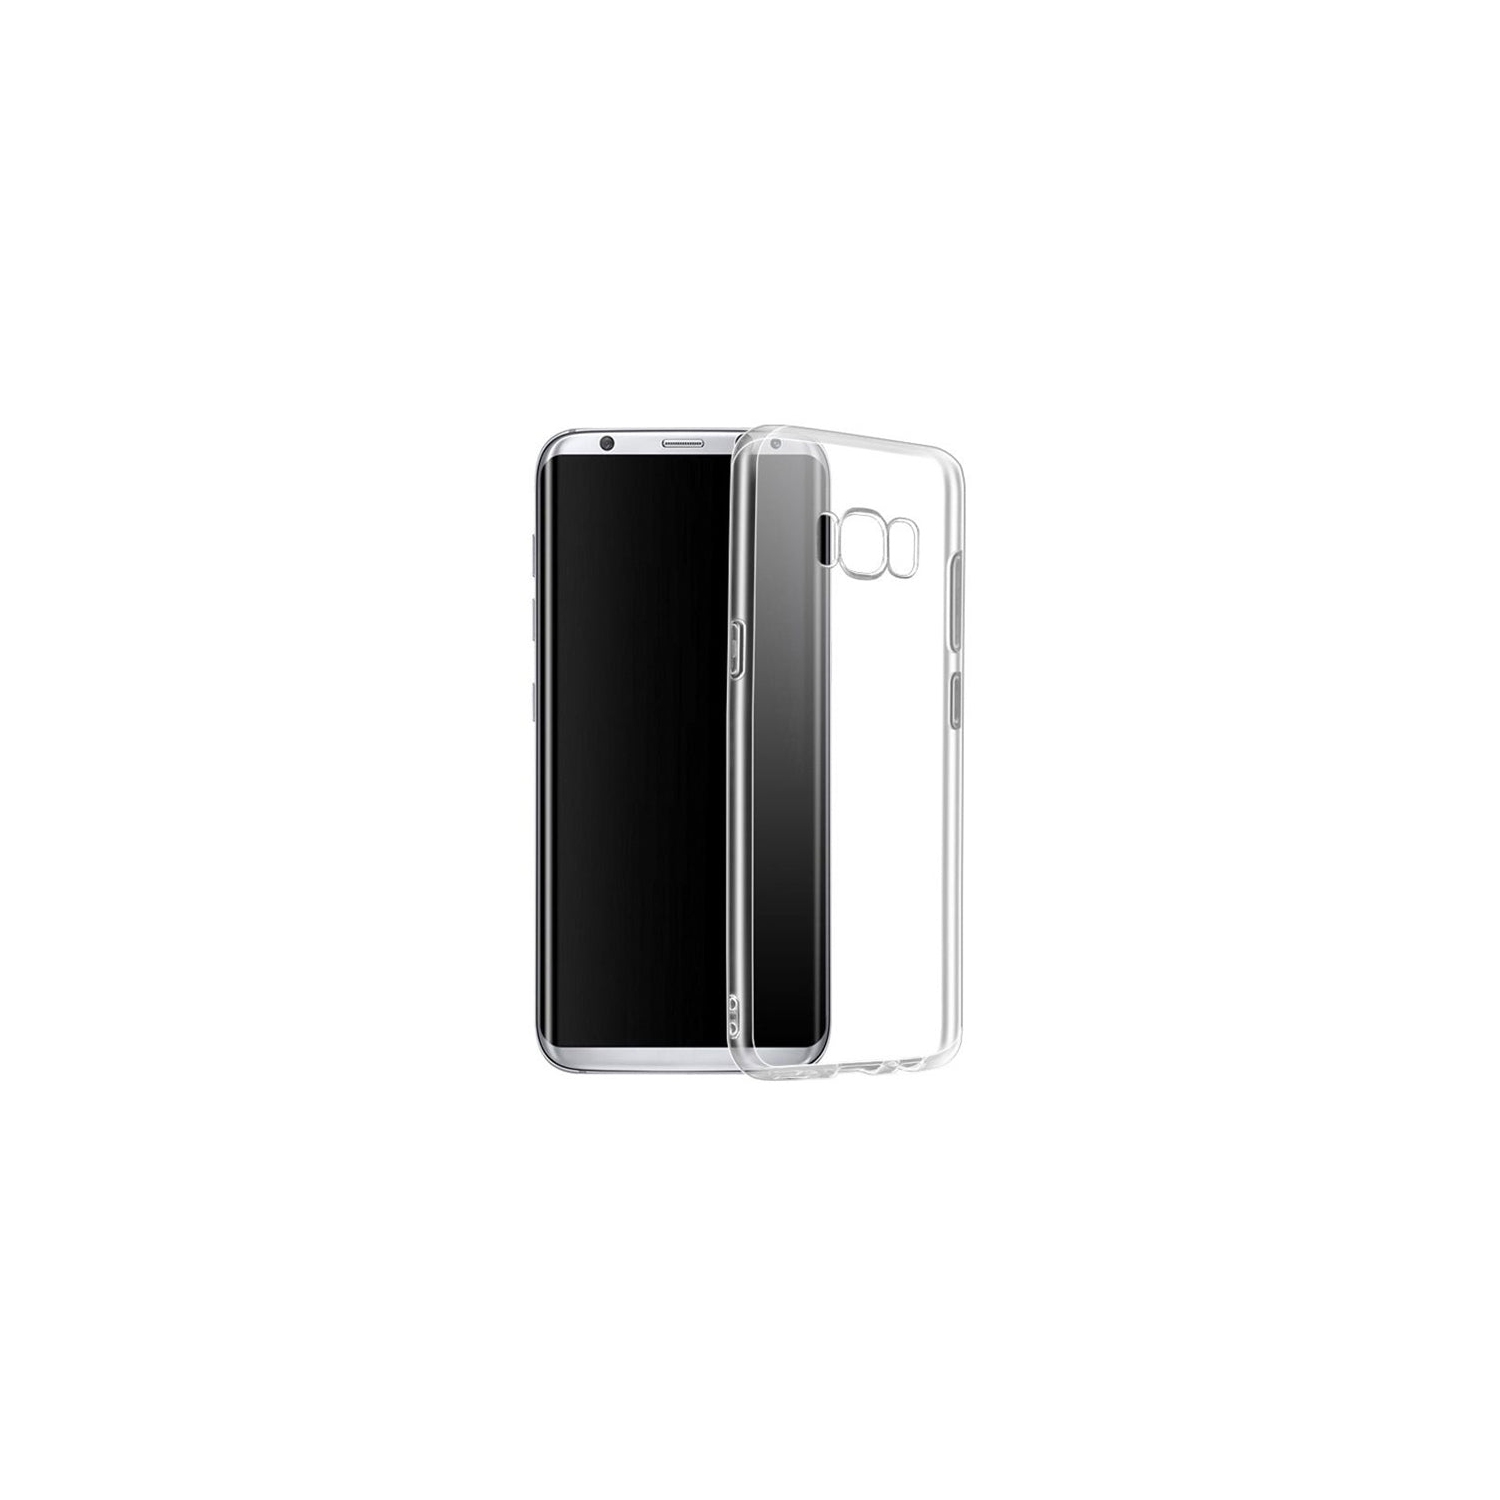 PANDACO Clear Case for Samsung Galaxy S8